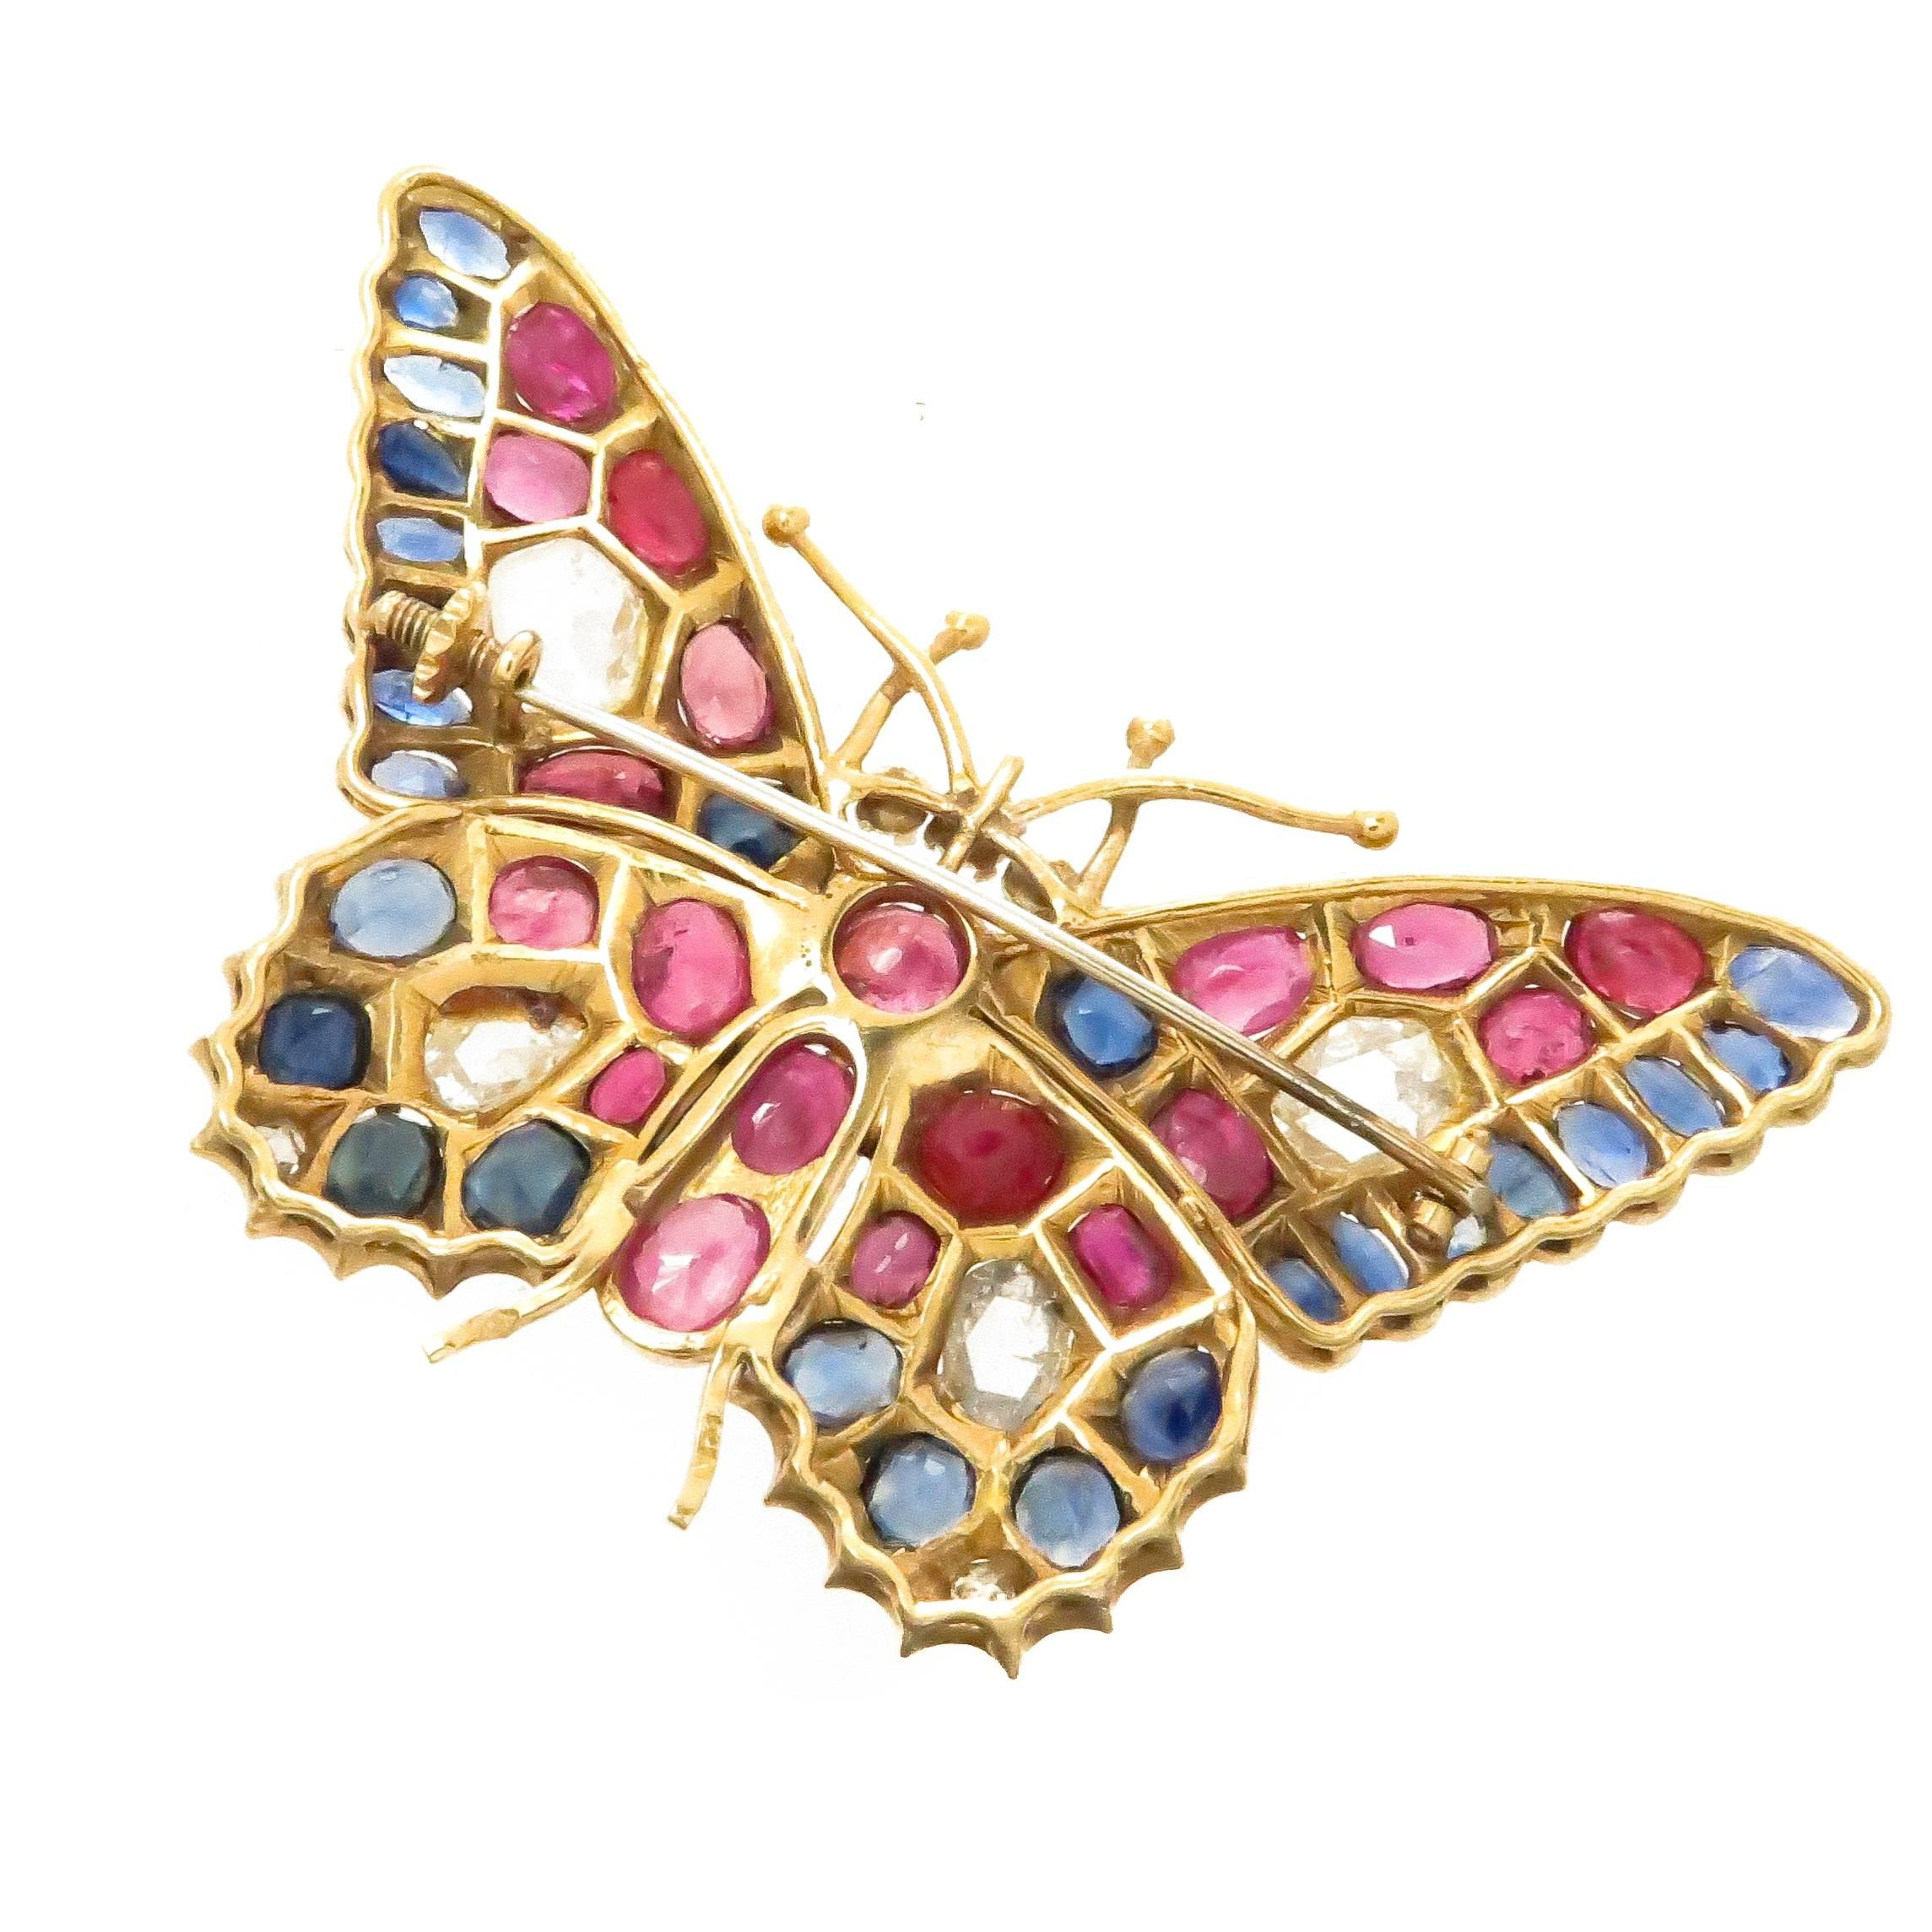 Circa 1920 18K yellow Gold Butterfly Brooch, measuring 2 5/8 inches across X 1 5/8 Inch. Set with 4 large rose cut Diamonds totaling approximately 3 carats and further set with smaller Rose cut Diamonds, Rubies, Sapphires and Pearls. Having Swiss